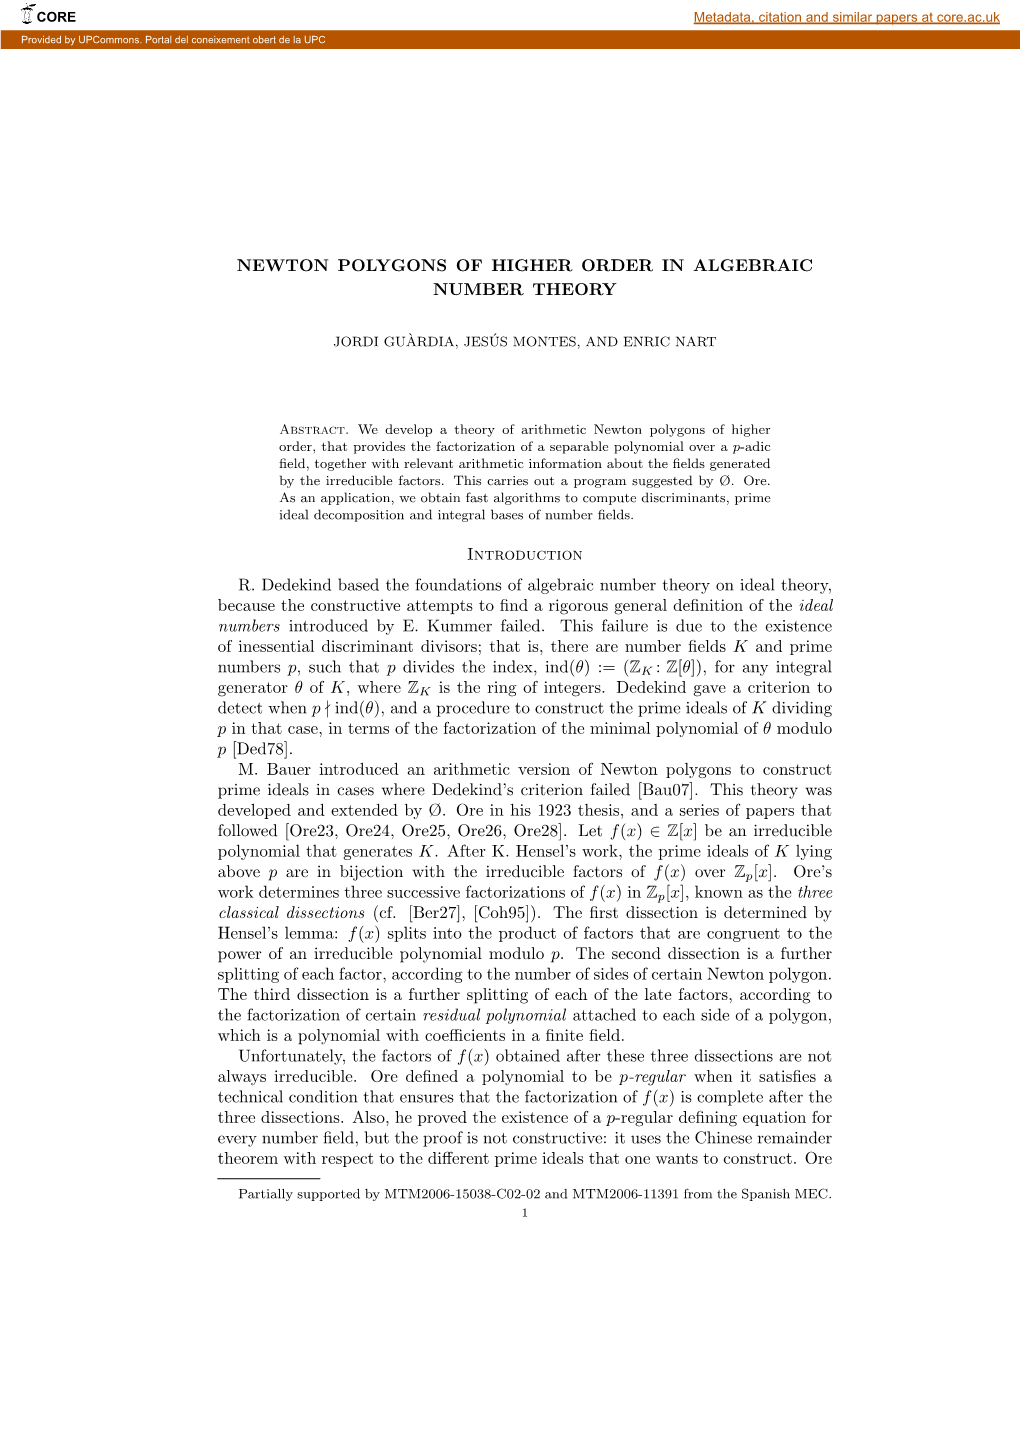 Newton Polygons of Higher Order in Algebraic Number Theory